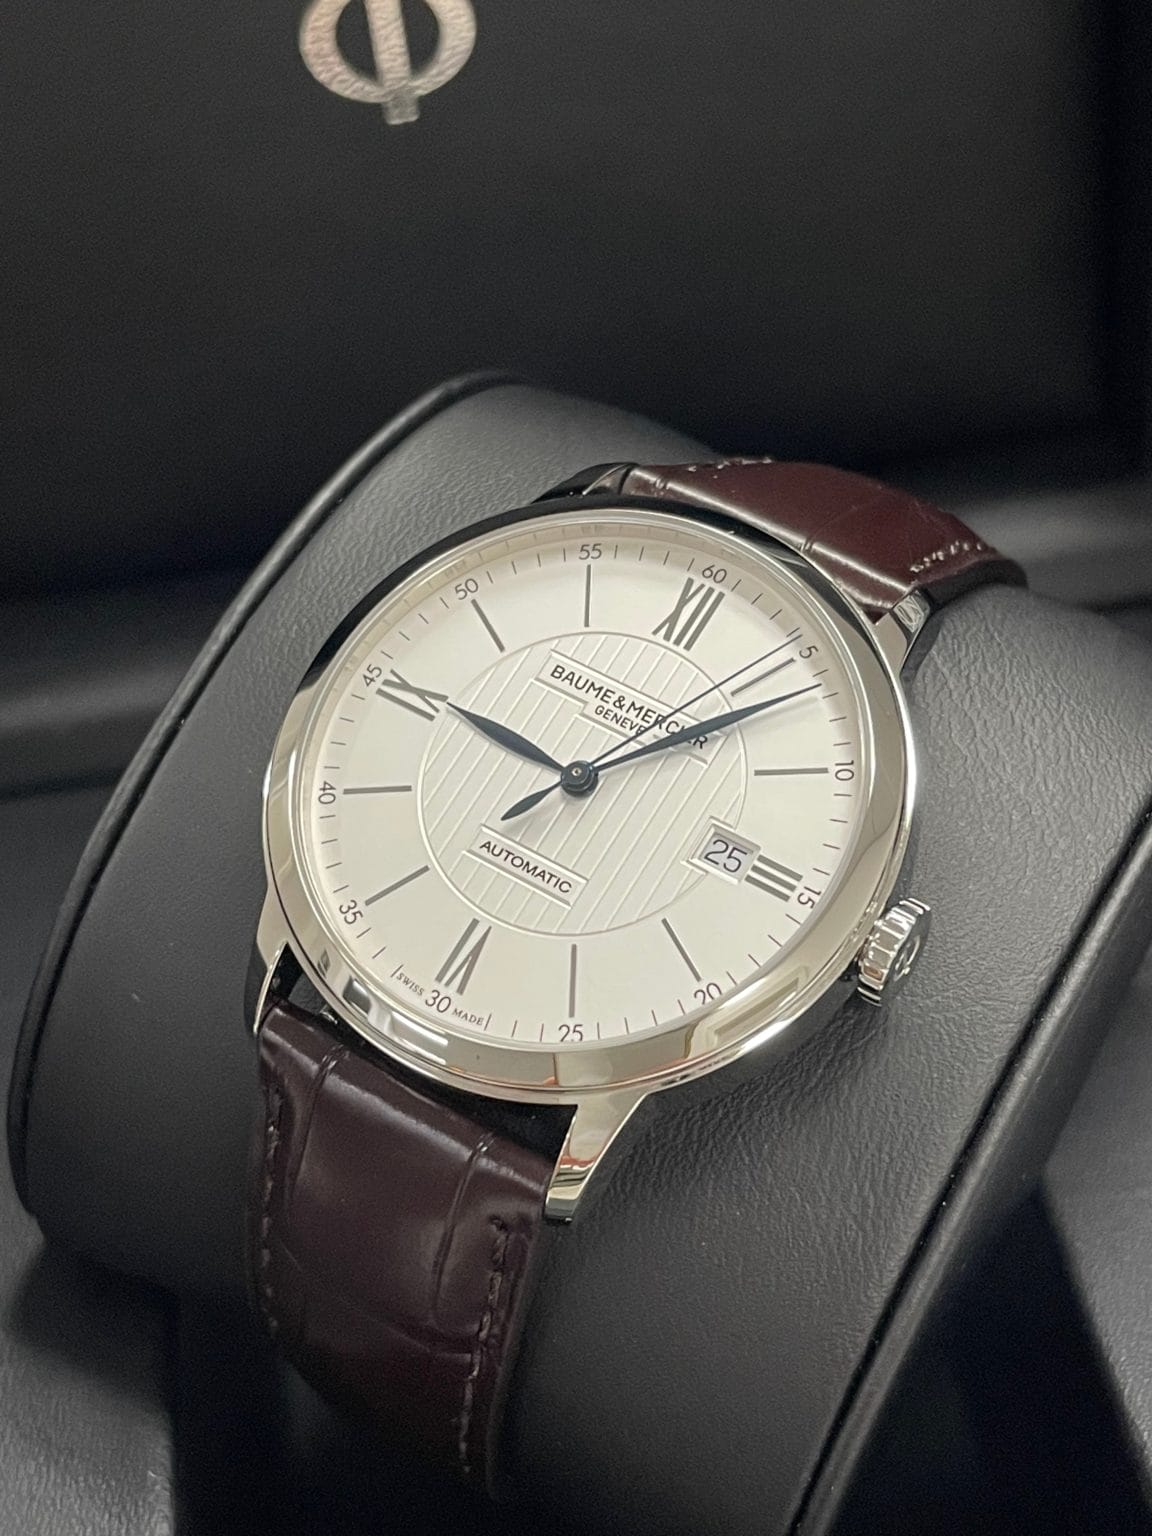 Baume & Mercier - Classima - M0A10214 - Stainless Steel - White Dial ...